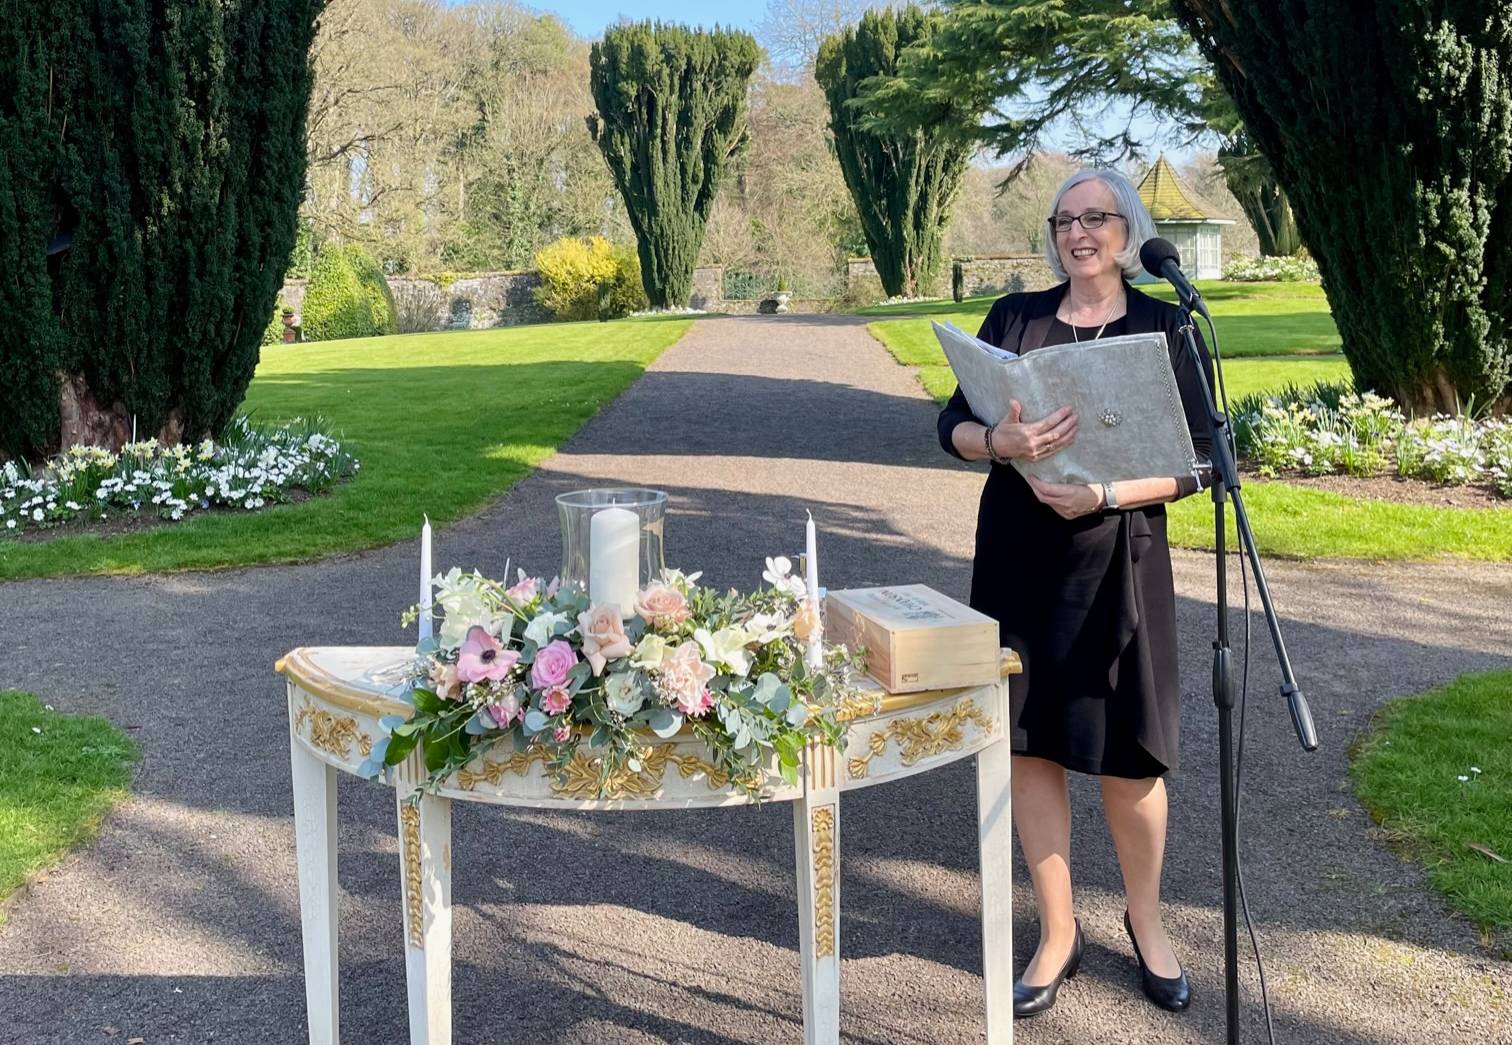 Outdoor wedding with Unity Candle ritual - Caroline McCarthy Celebrant & Registered Celebrant Ireland - Cork Kerry Tipperary Limerick Kildare and more